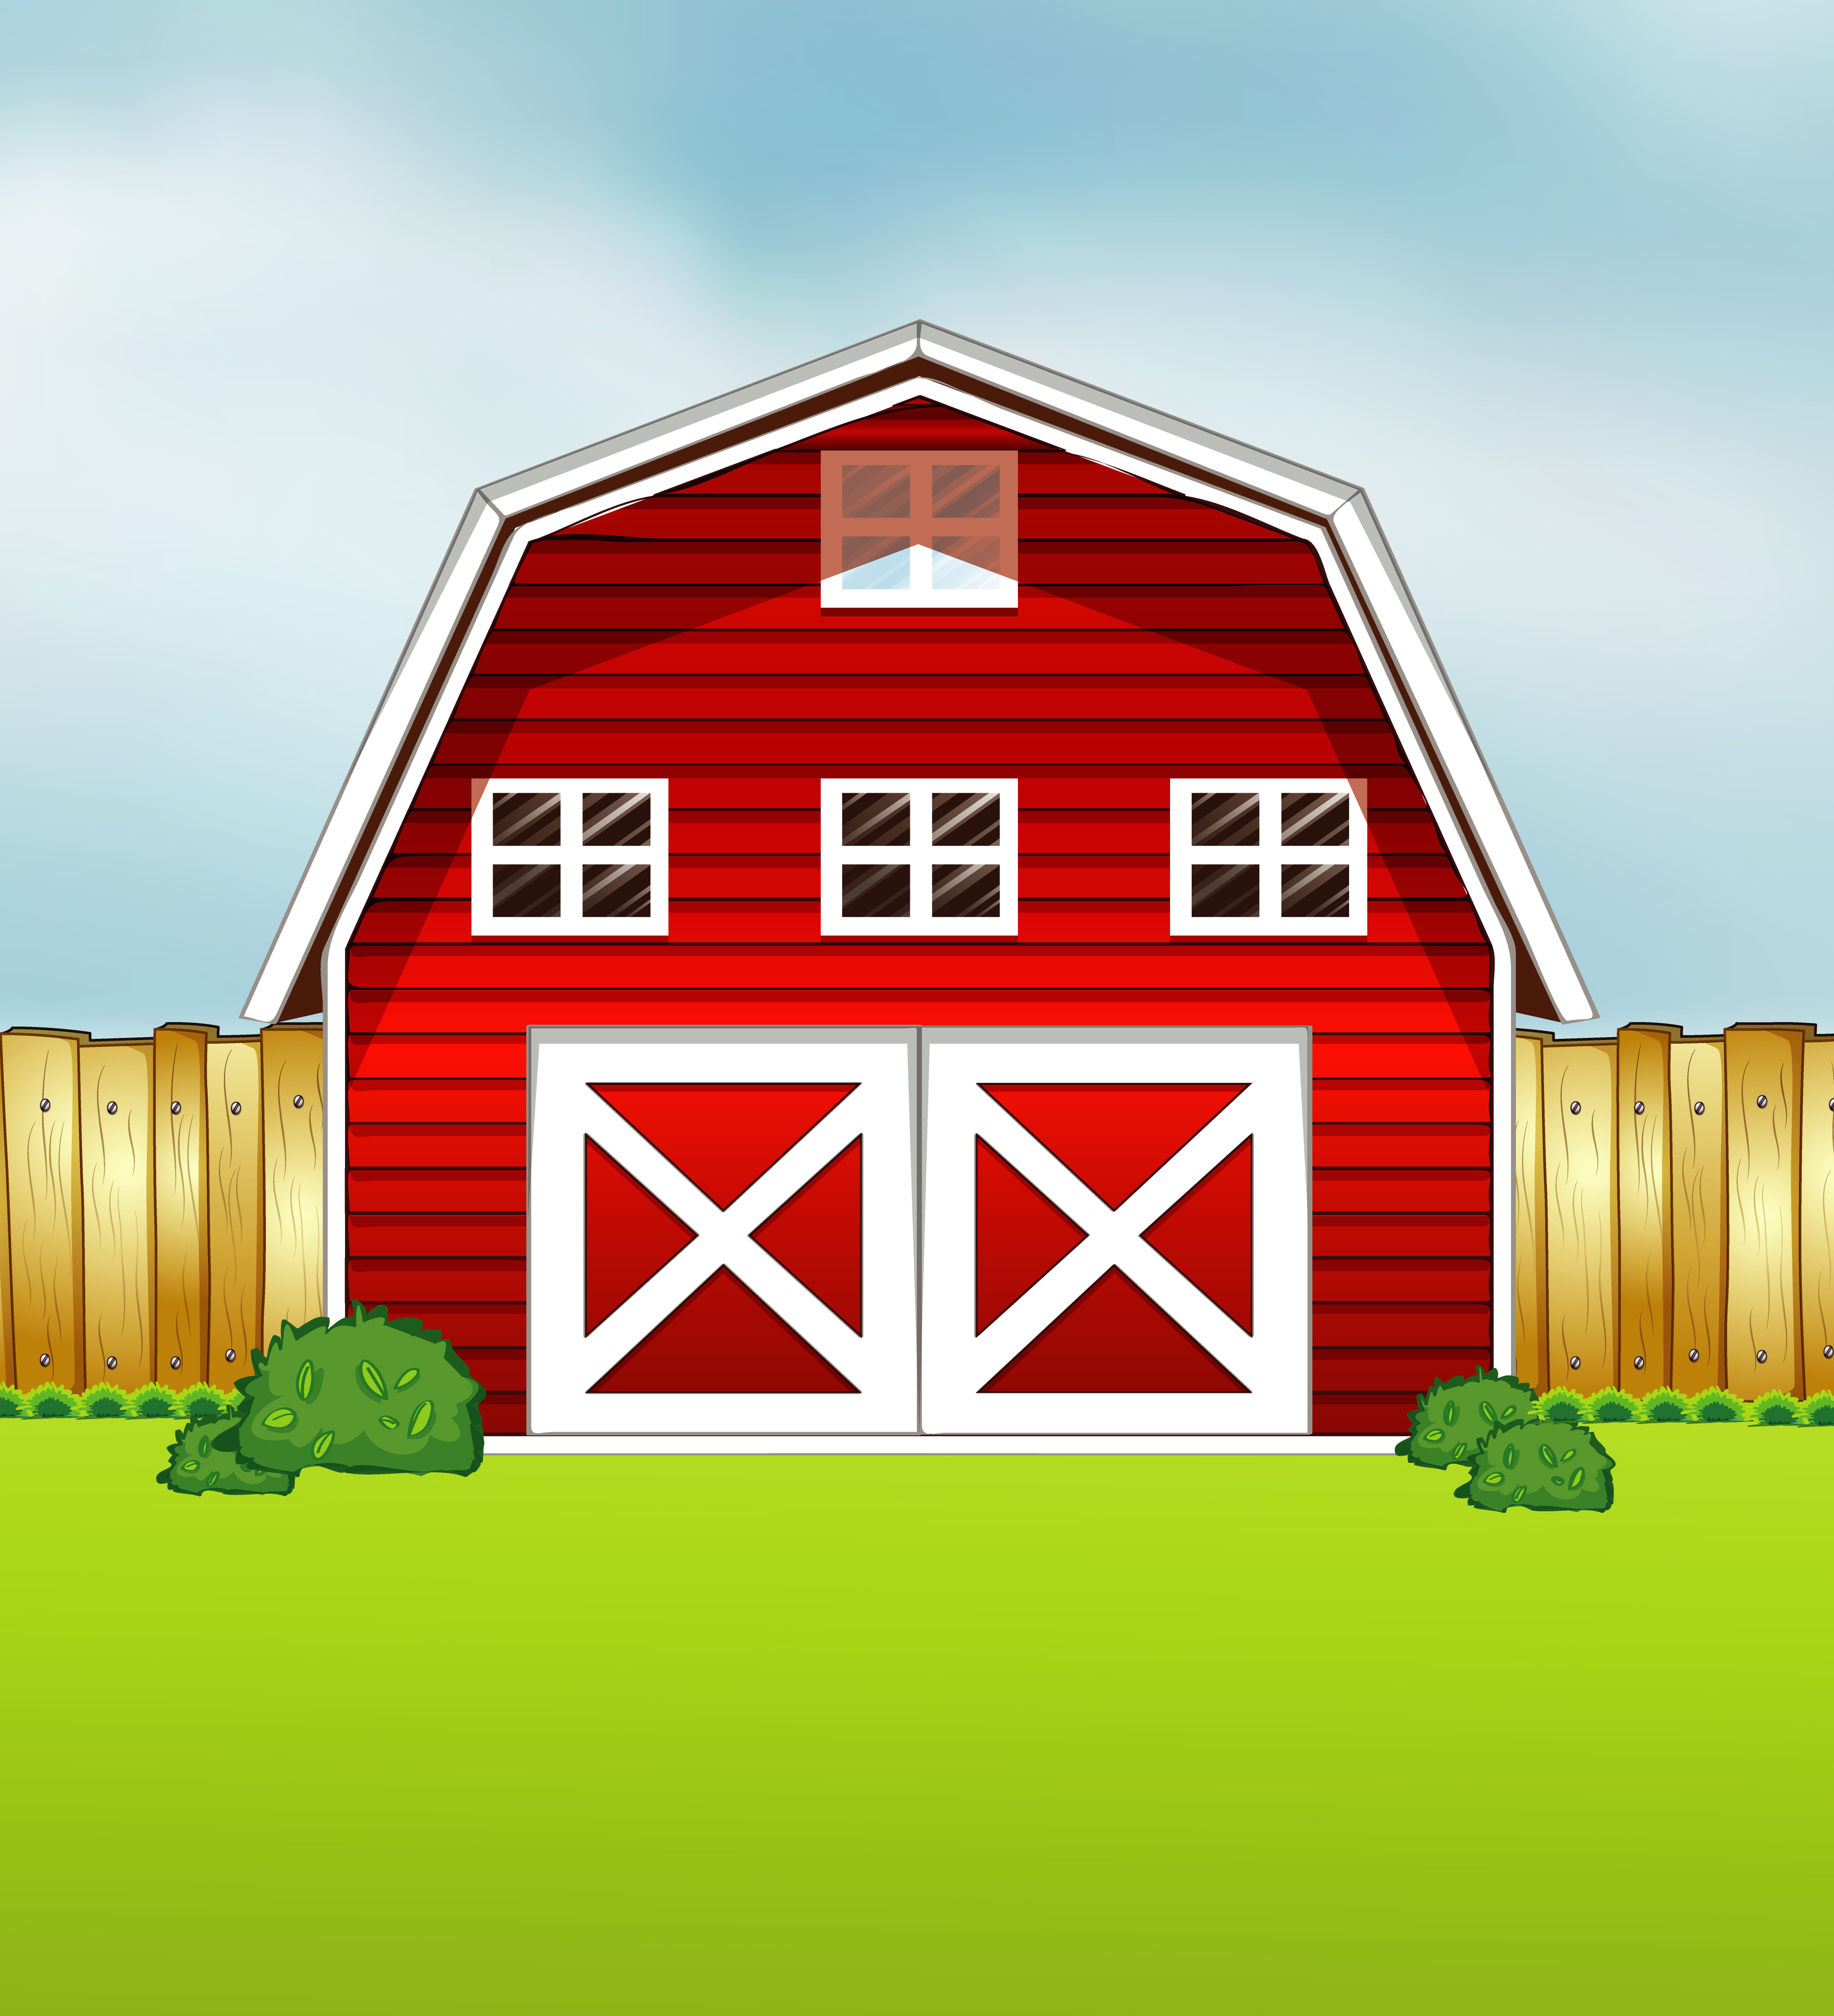 Red Barn Cartoon Style On Green And Sky Background 1505251 Vector Art At Vecteezy